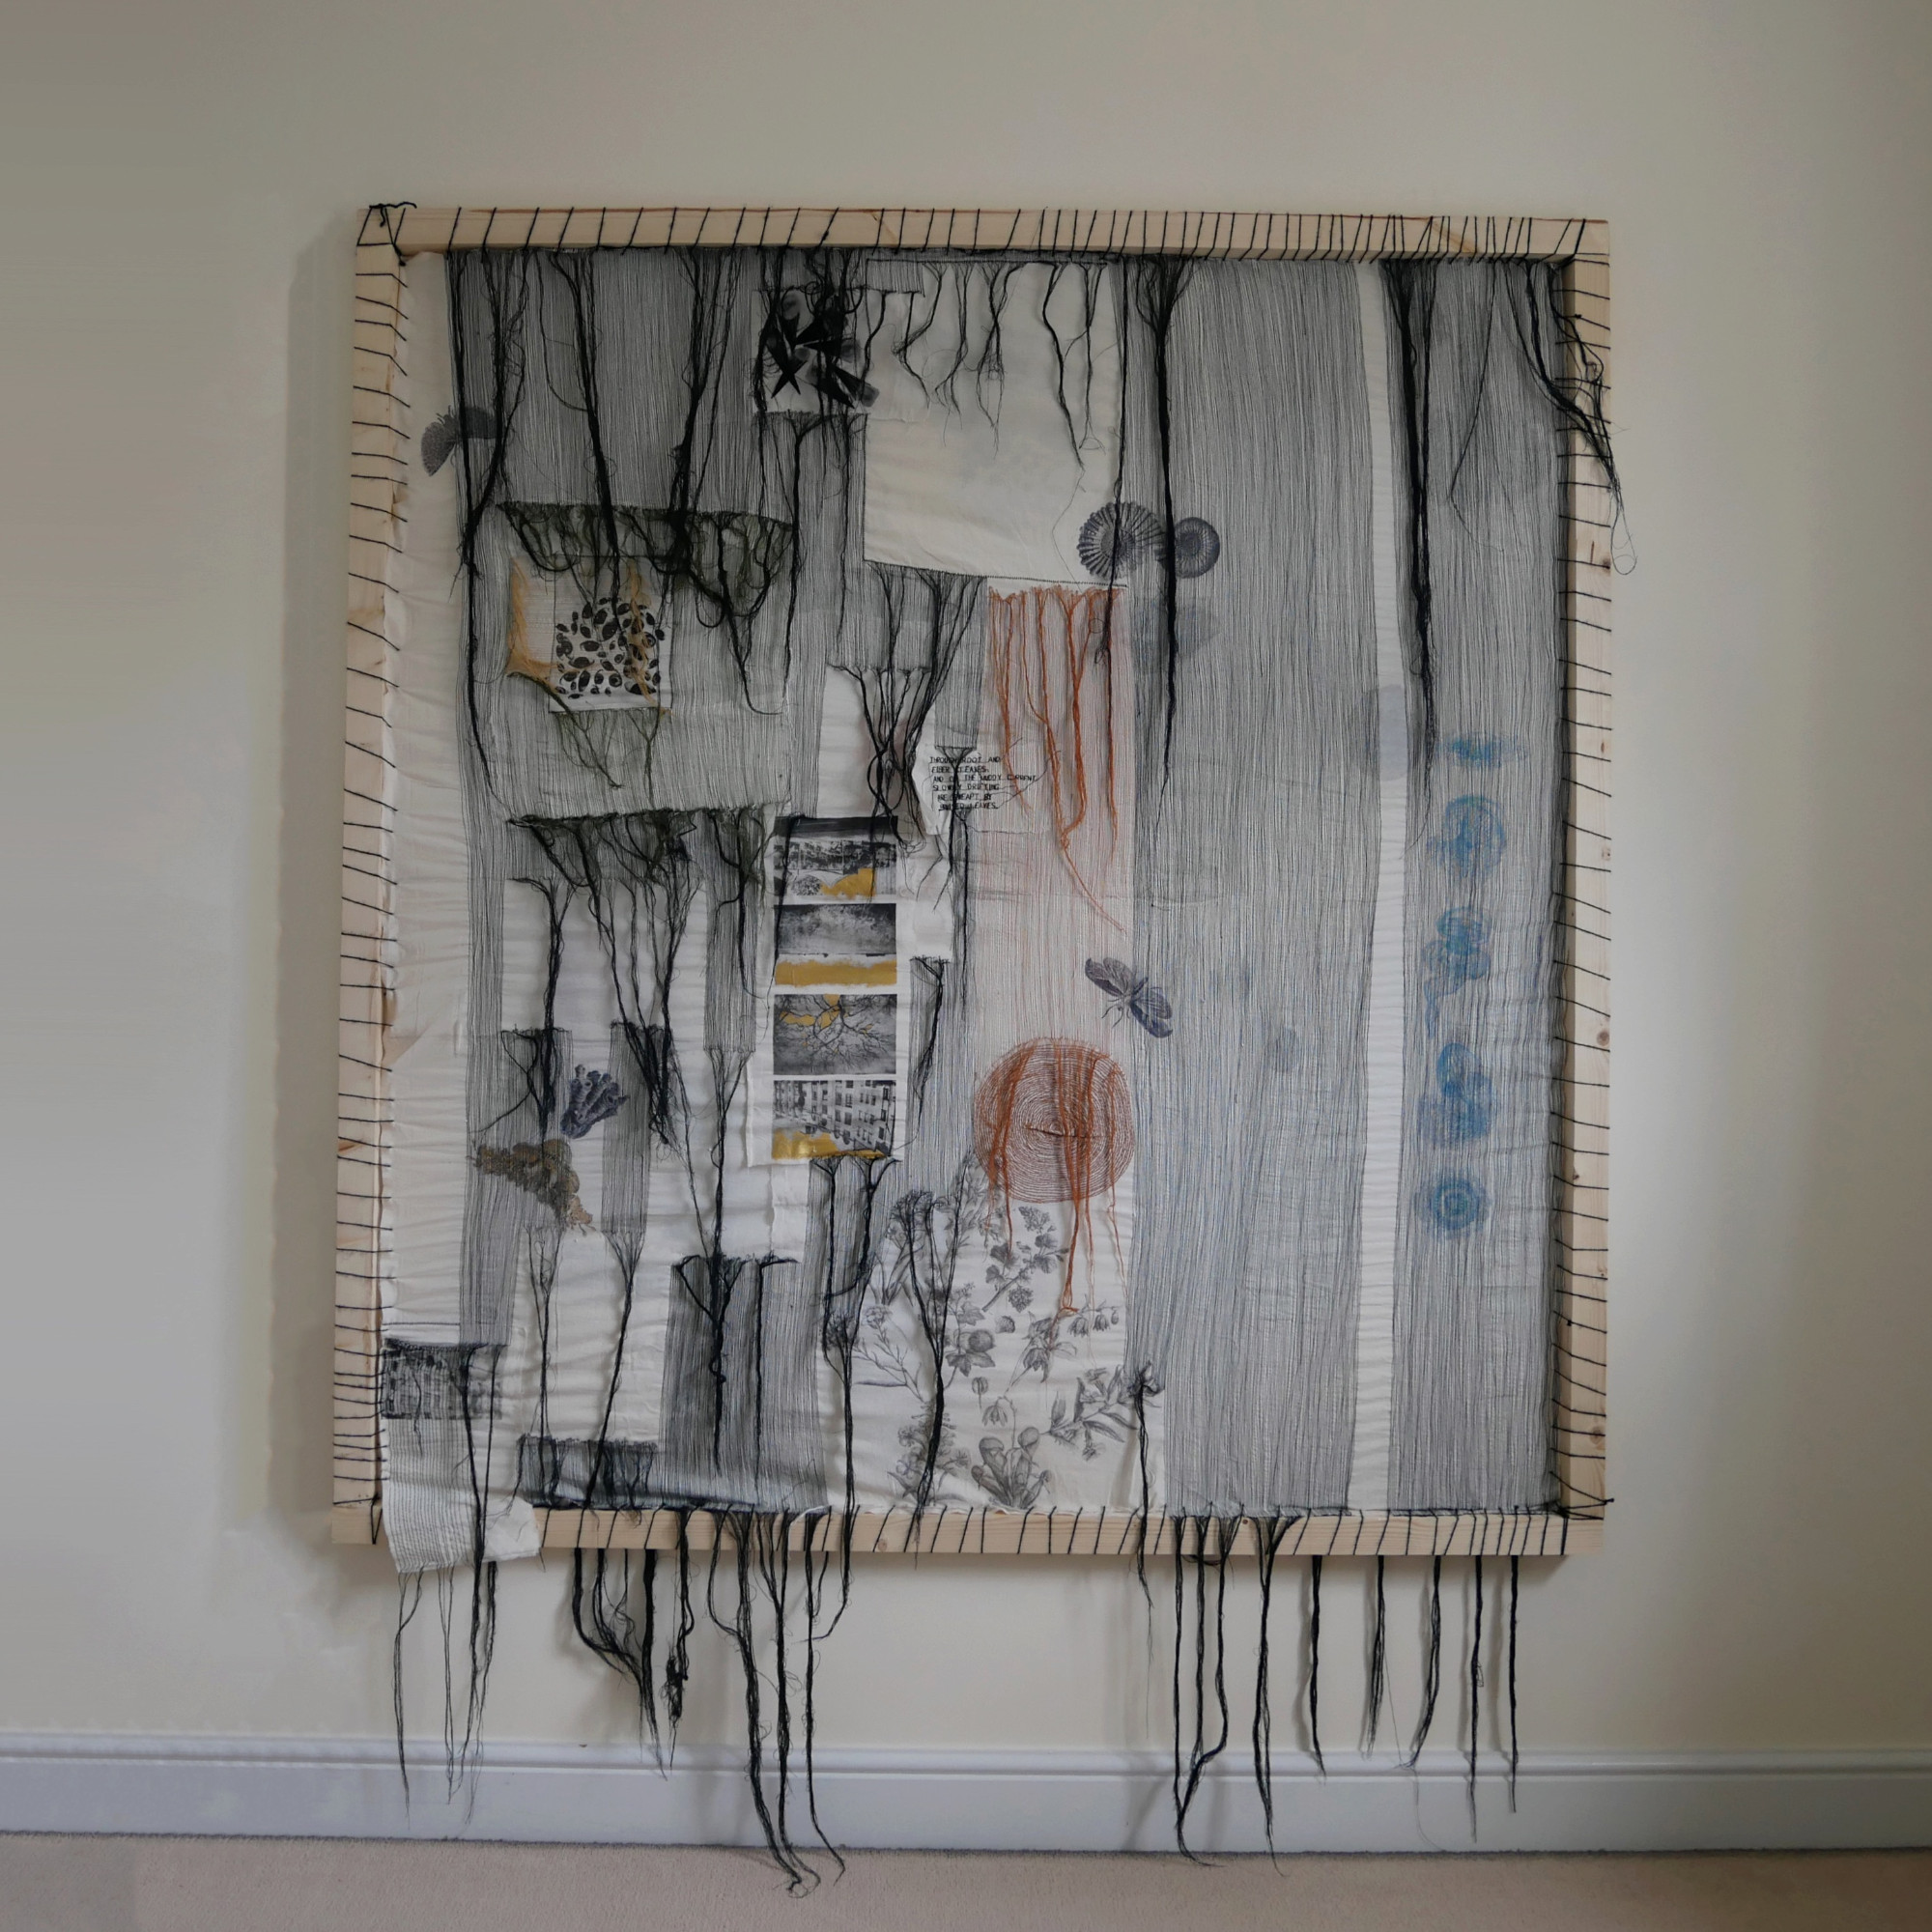 "Sweet Agony", (side A and side B, double sided composition), 2020, image transfer, polymer print, and acrylic thread on canvas, in a wooden frame, 170x150cm. Edina Horvathova.